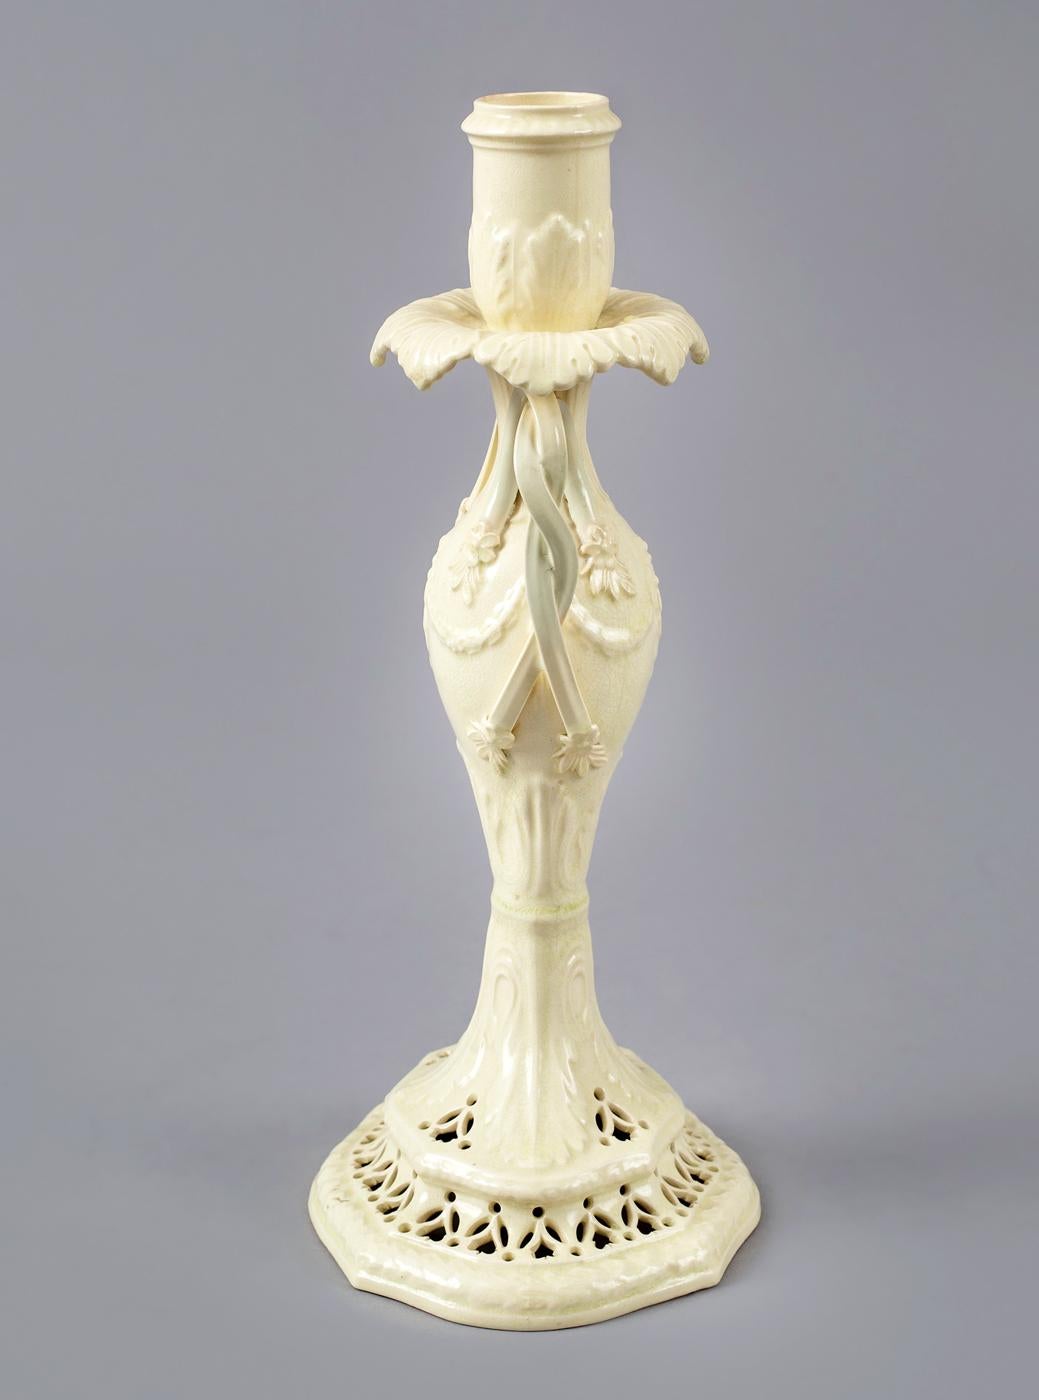 Early elegant creamware candlestick, the double strap handles are twisted and end in leaf terminals, the bobeches supported by a shaped leaf drip tray, the vase shaped body on a pierced base. The piercings are stylized flower heads and leaves.